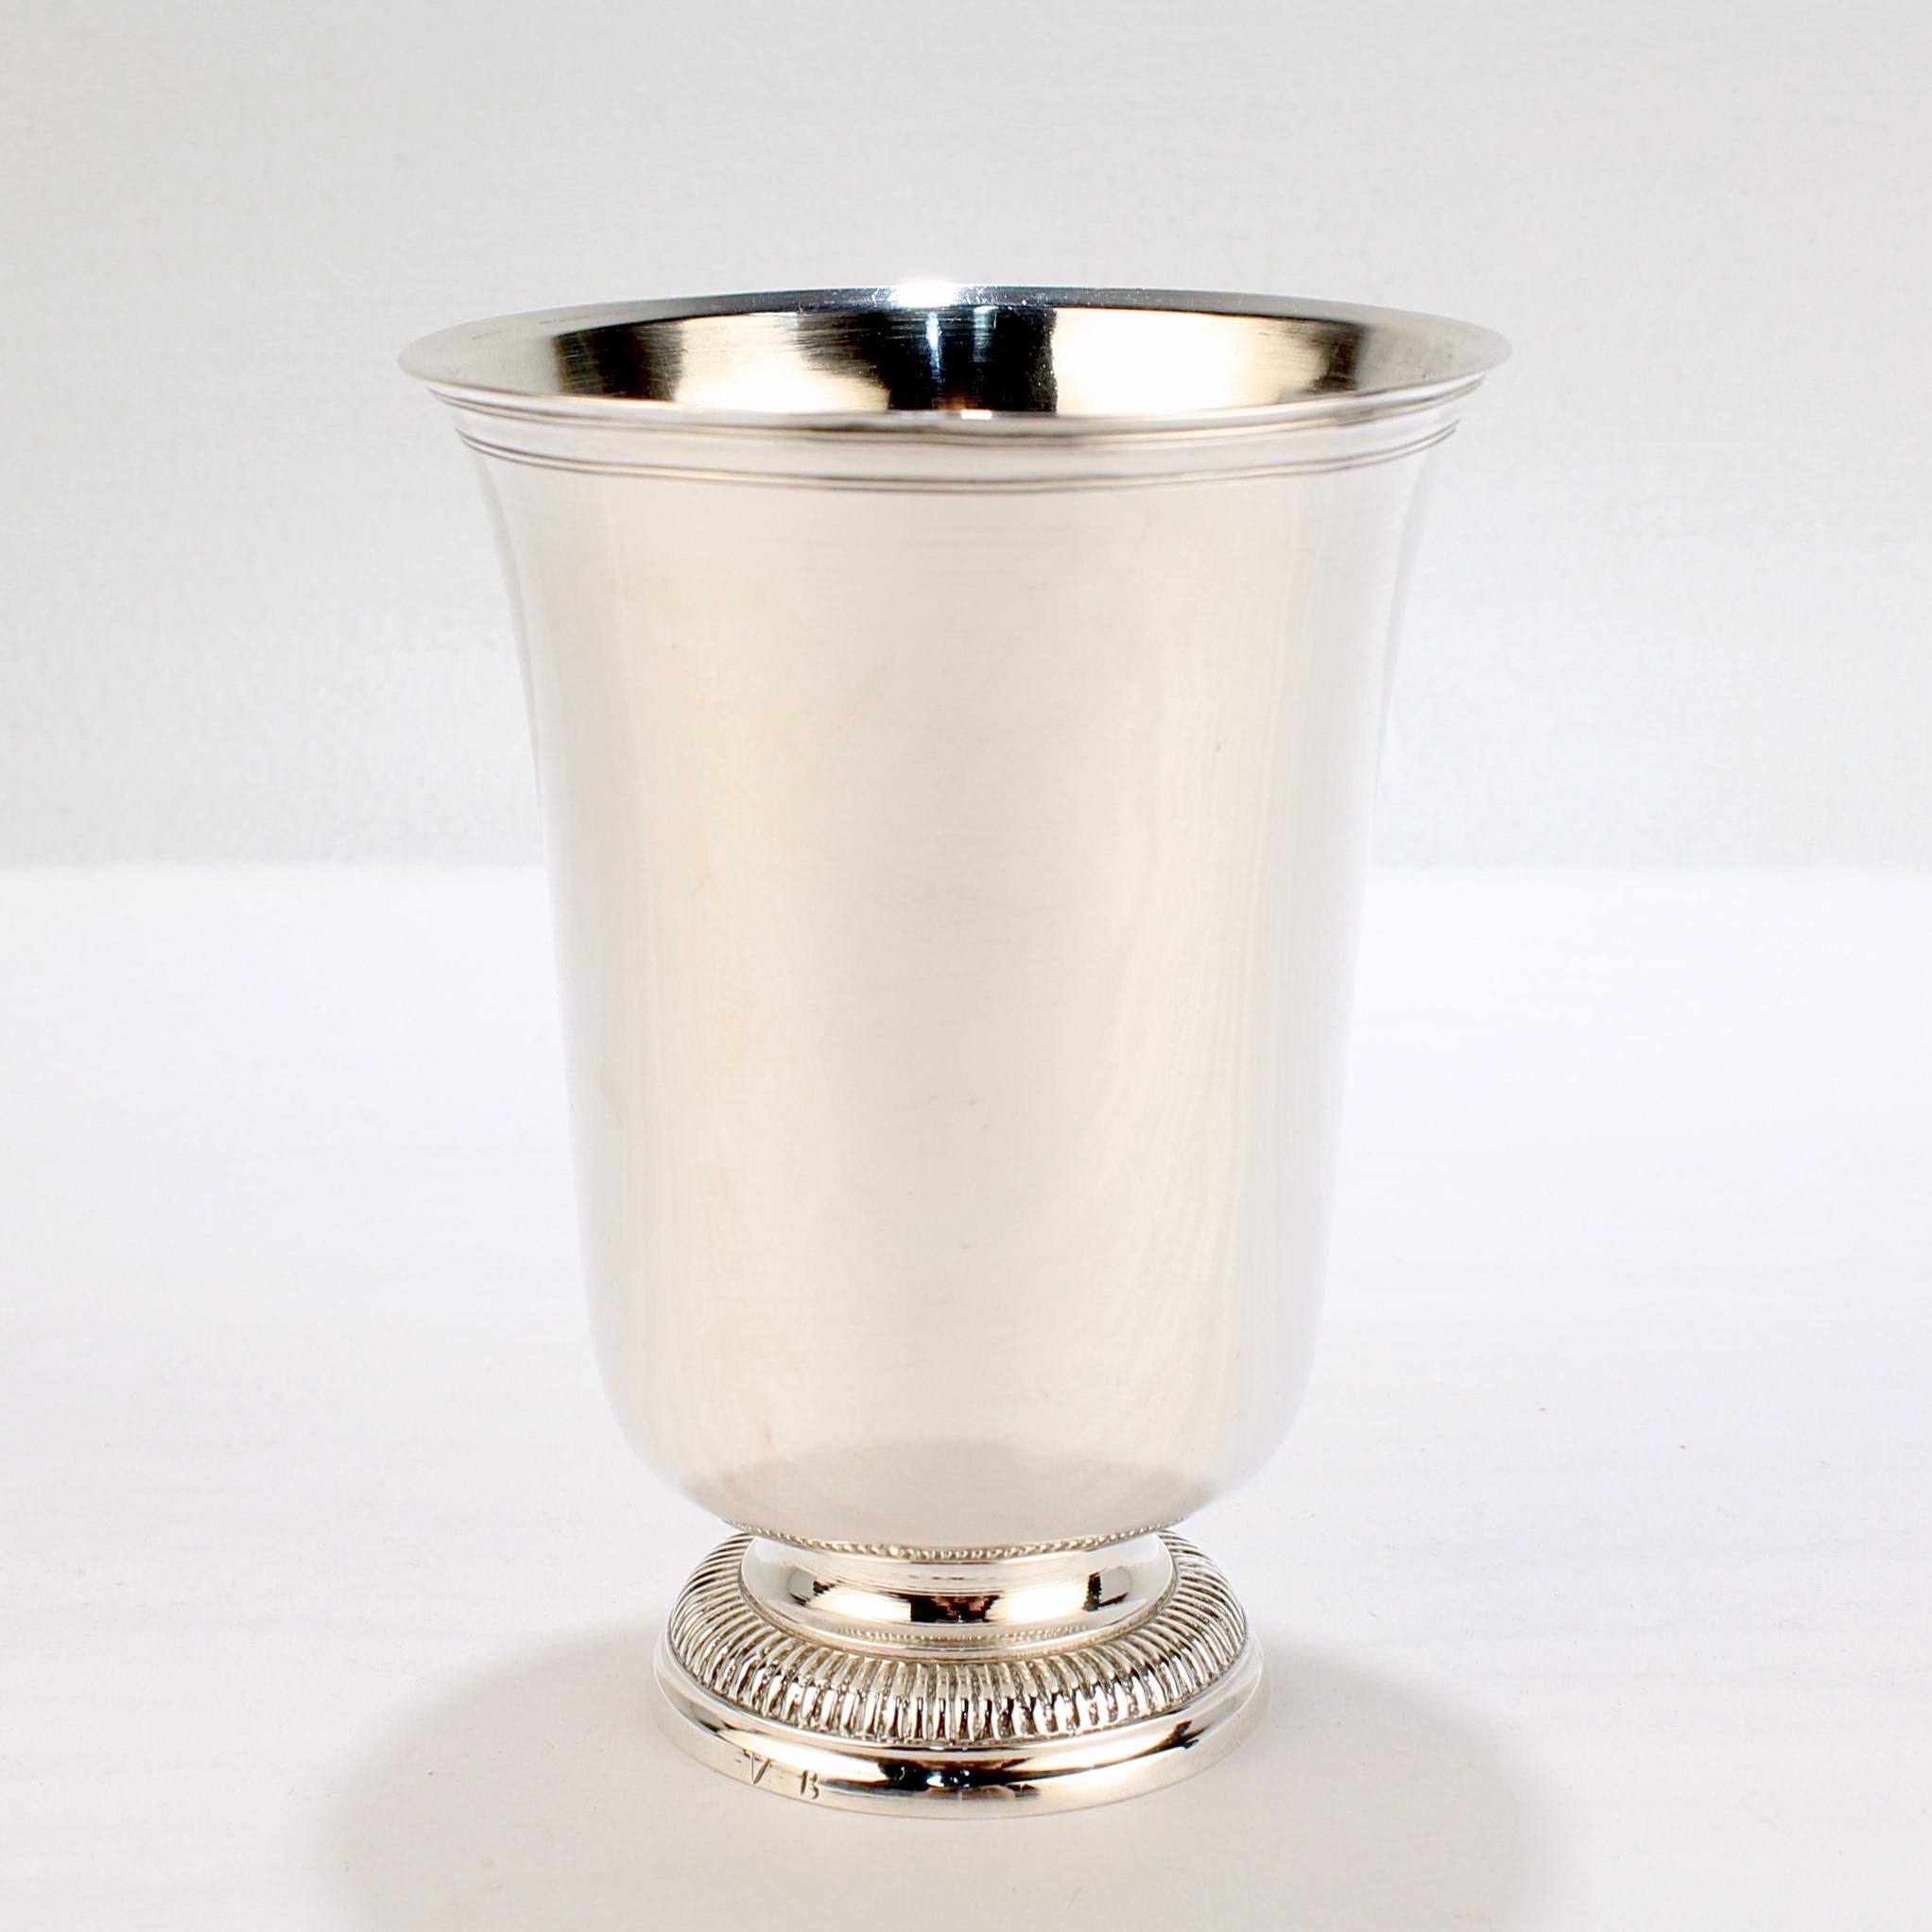 A fine antique French silver beaker.

Illegibly hallmarked to the base and side and inscribed with an owner's mark 'VB' to the foot.

Simply a wonderful example of 18th Century French silver!

Date:
ca. 1800

Overall Condition:
It is in overall